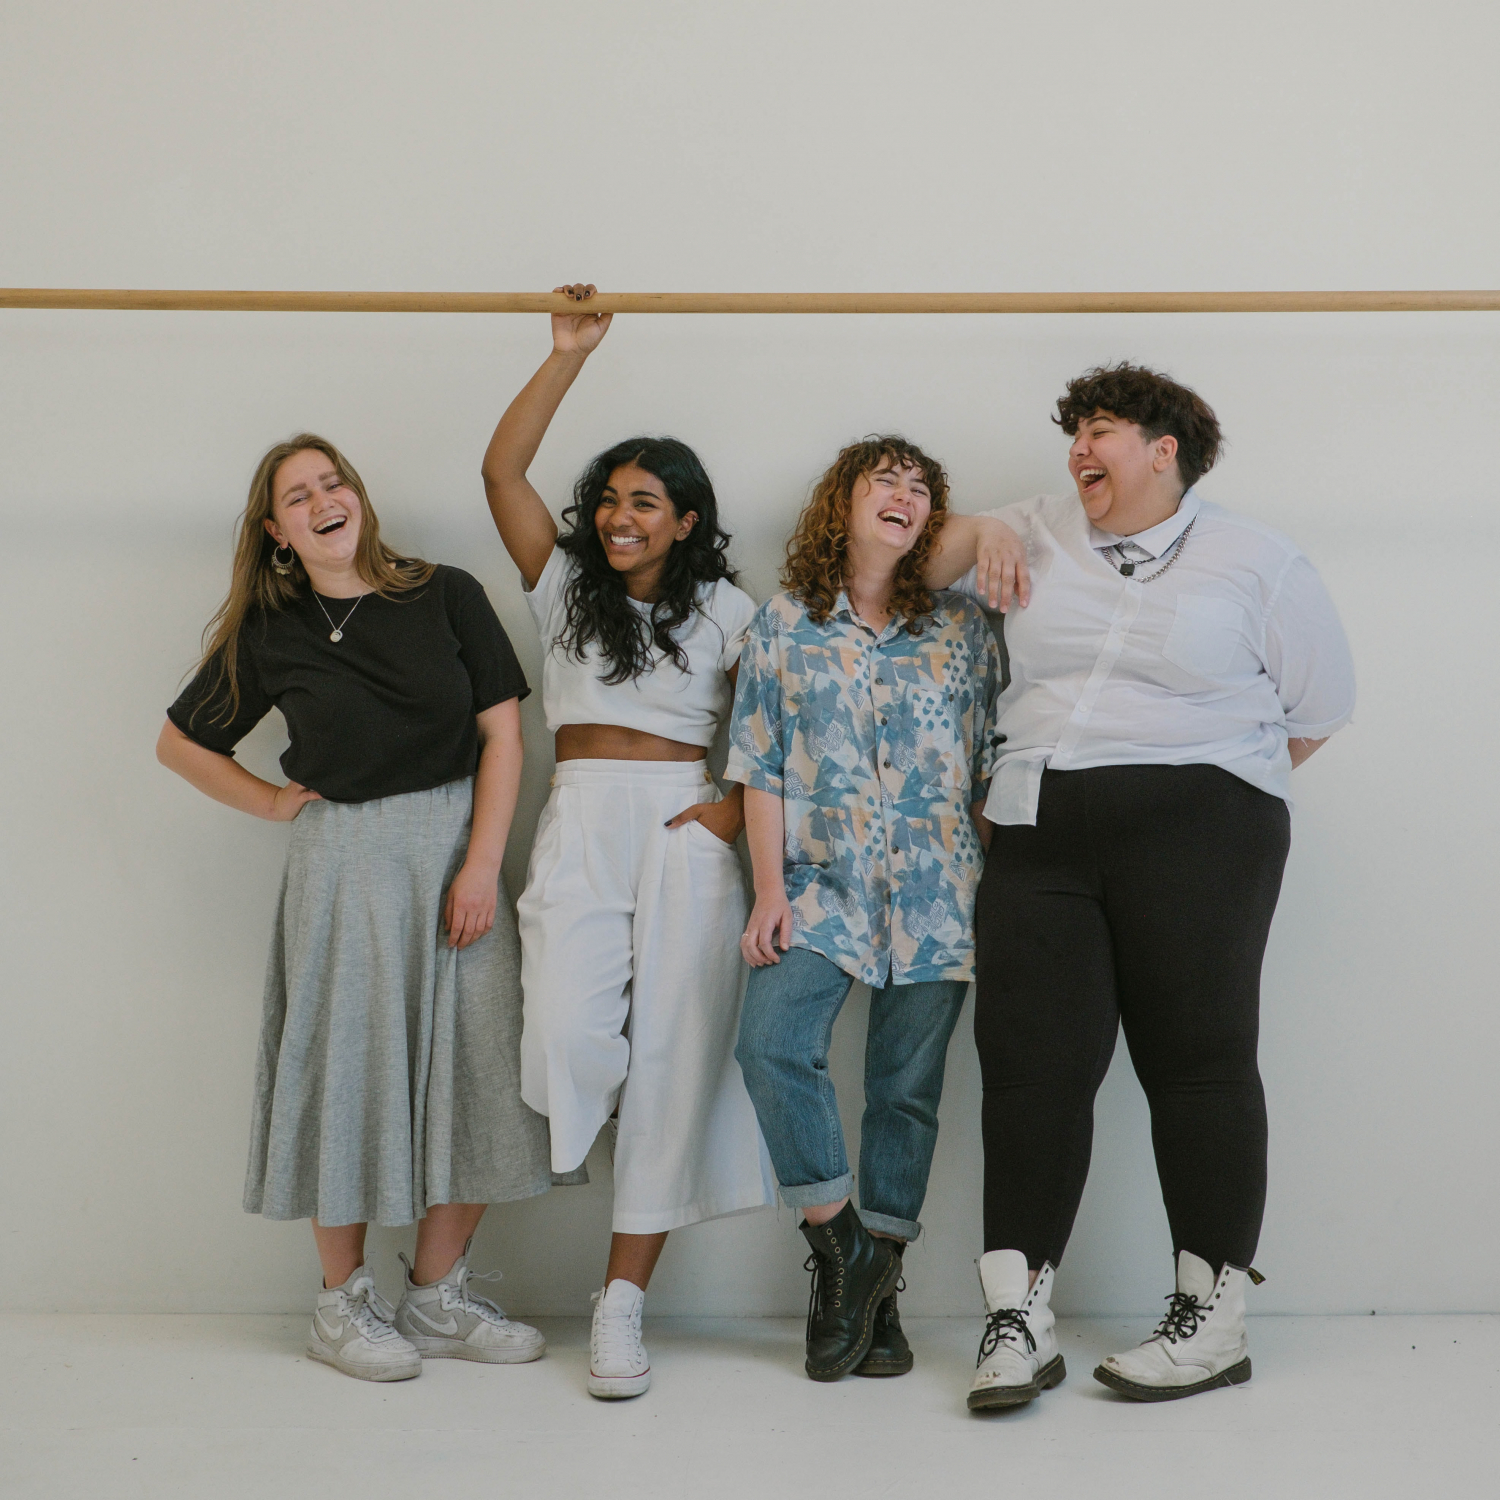 Four laughing friends in casual wear leaning against a white wall with a bar of wood running horizontally overhead. Credit Emma Chau Tran from Unsplash